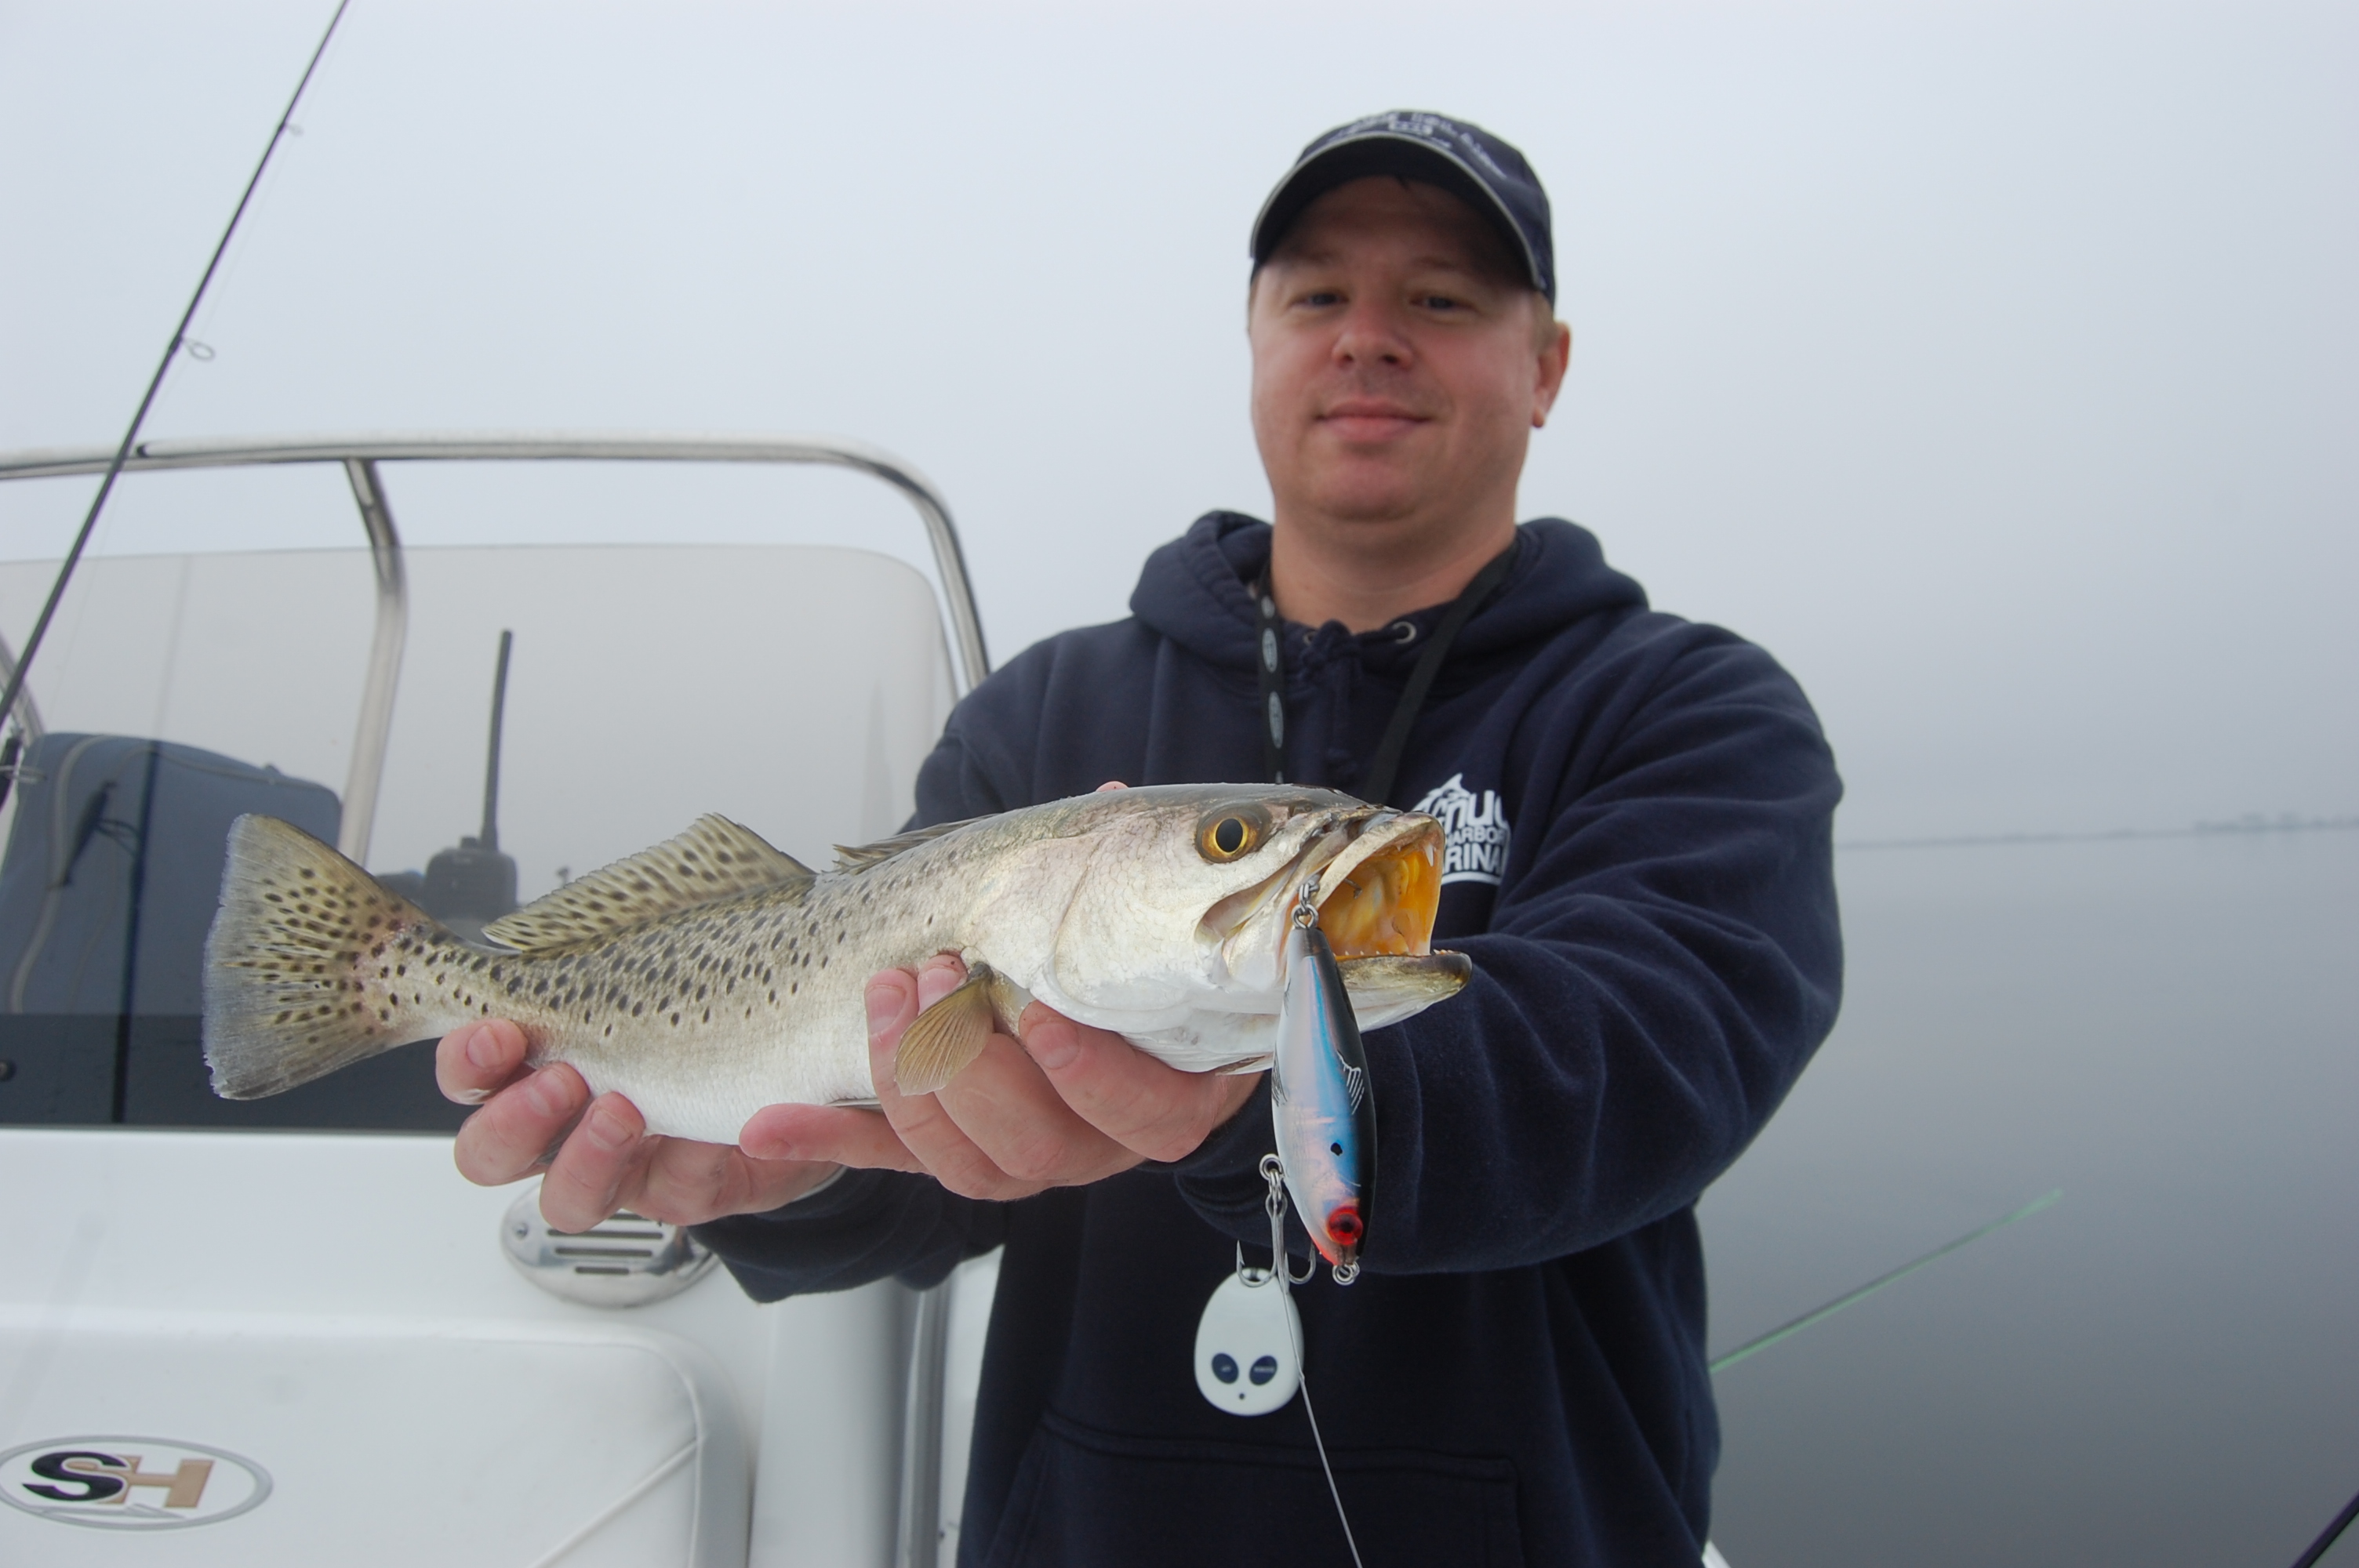 things to do in tampa, Fishing Charters Tampa, South Tampa Fishing Charters, Tampa Fishing charters, Tampa Bay Fishing Chartes